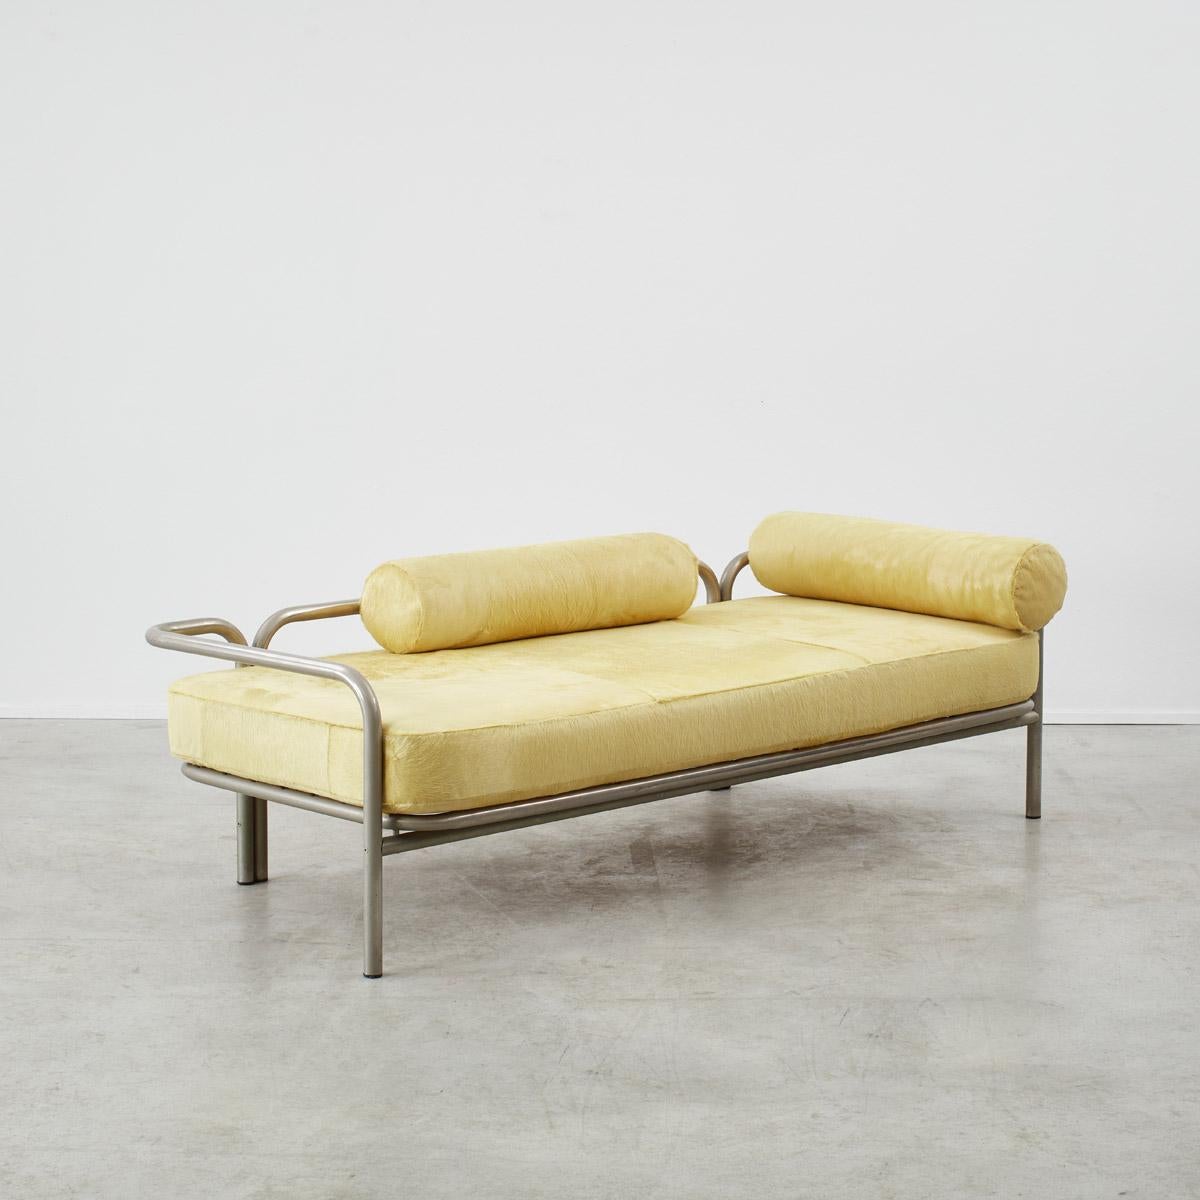 Italian Gae Aulenti Locus Solus daybed for Poltronova, Italy 1964 For Sale